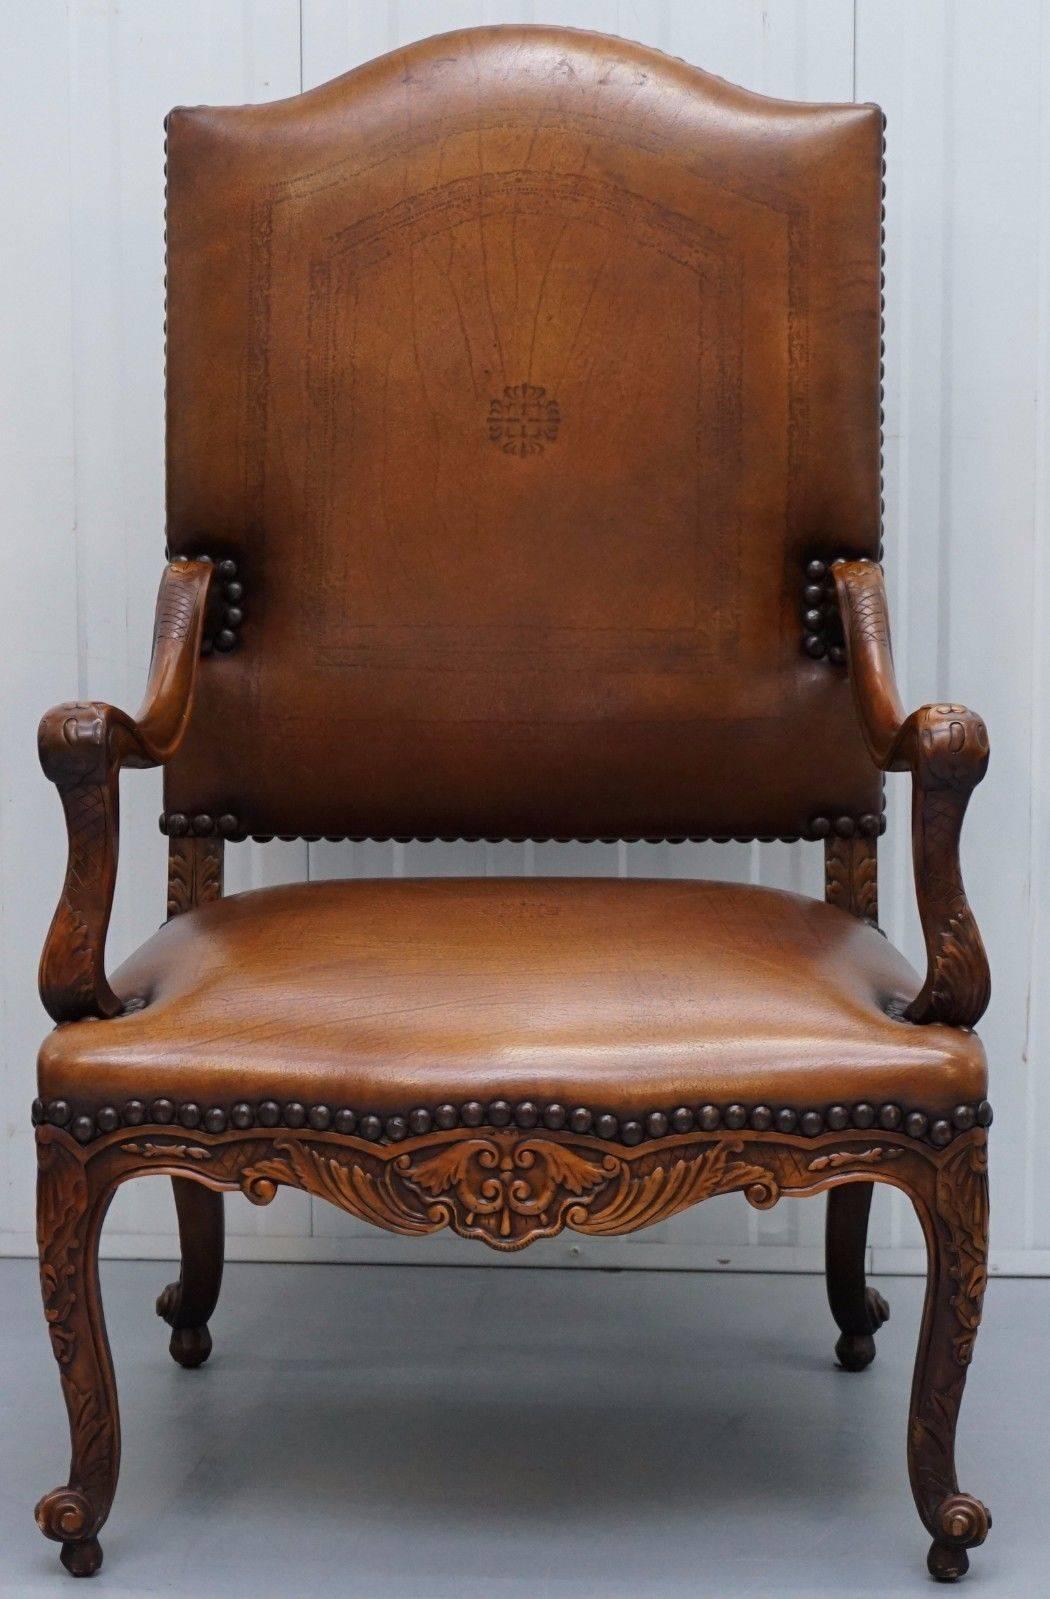 We are delighted to offer for sale this very large and grand Theodore Alexander high back aged brown leather embossed French Louis style throne armchair

A very comfortable and attractive armchair, handmade using carved arcadia wood and